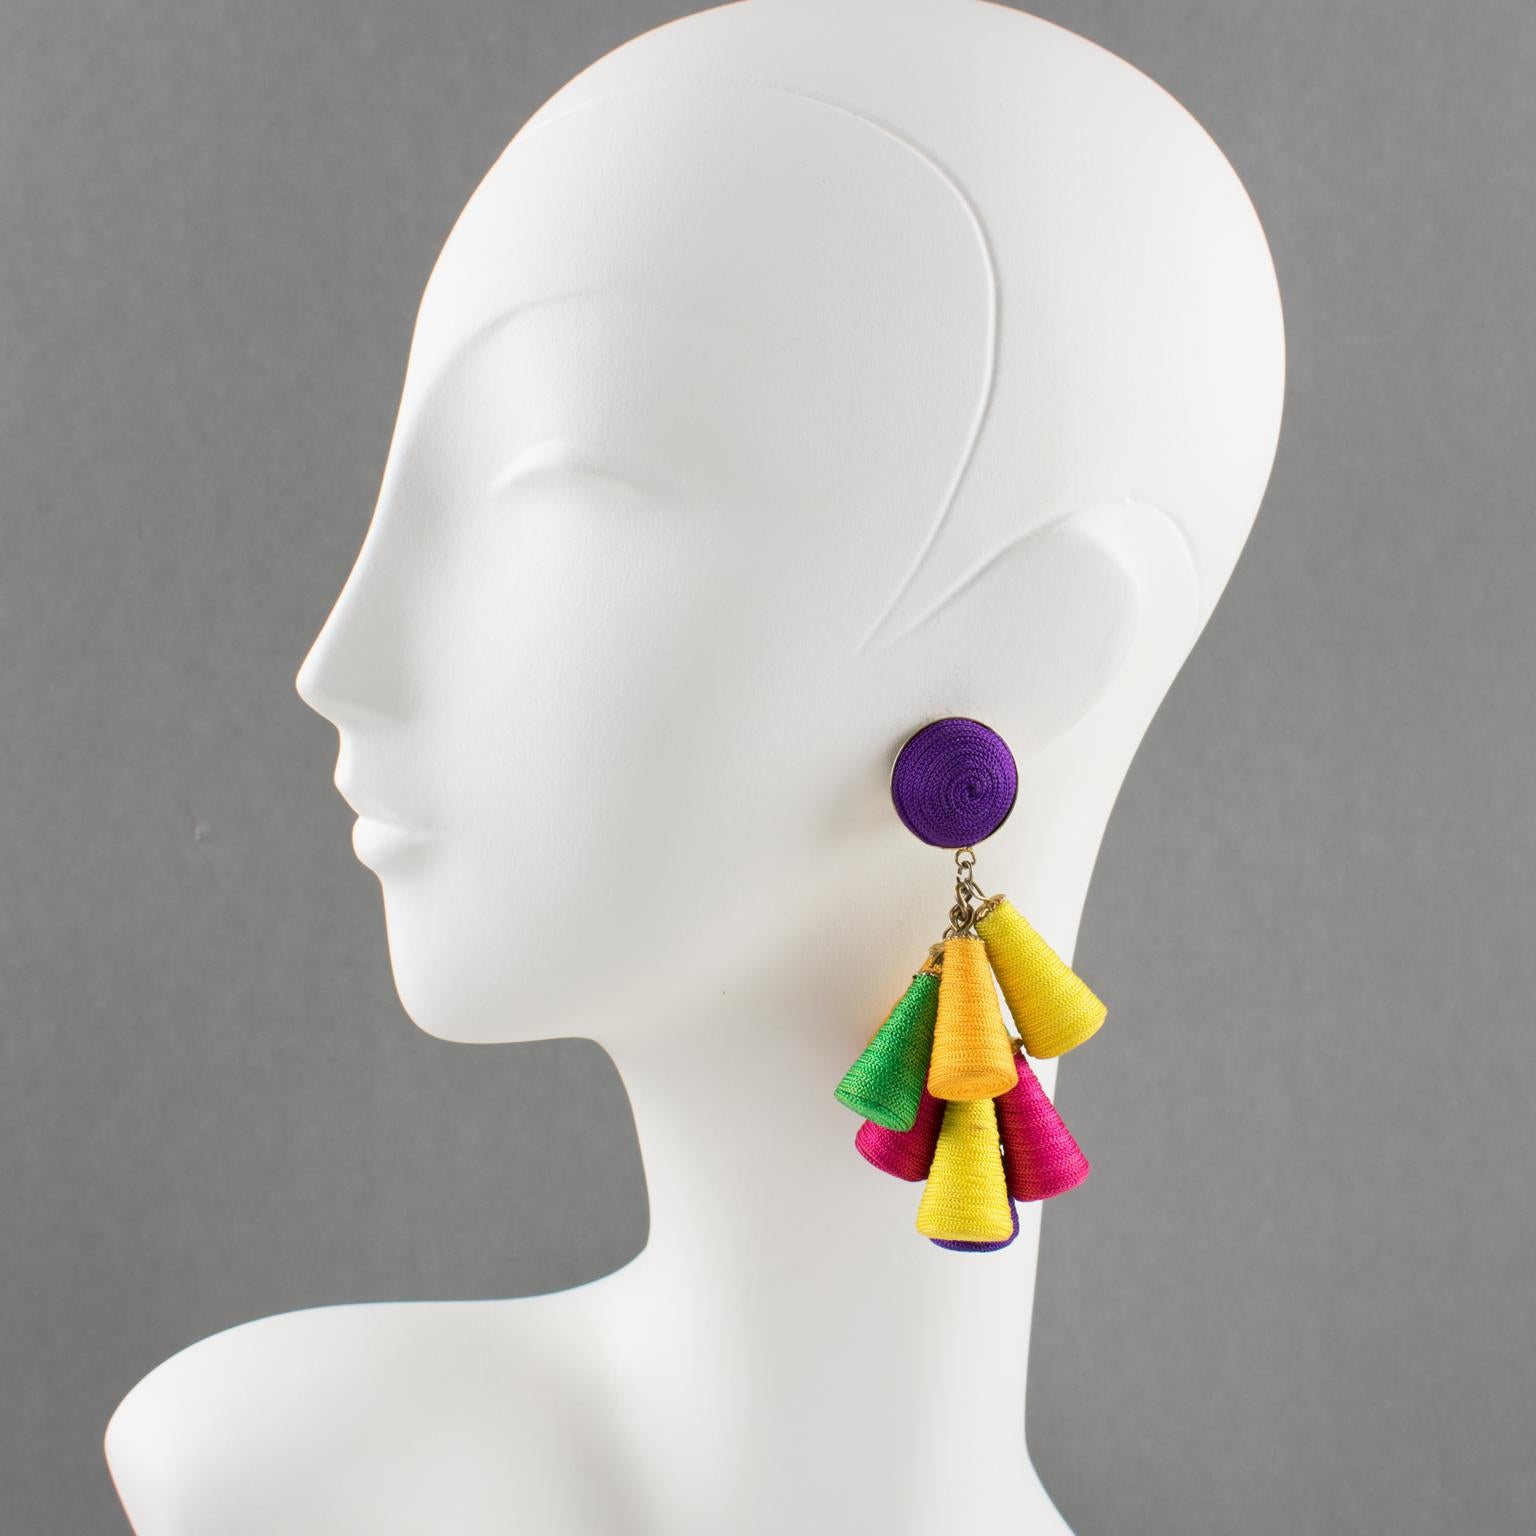 Disco perfection, these clip-on earrings have a vintage look. Oversized long chandelier dangle shape with cone charm elements, all wrapped with multicolor thread. Assorted colors of purple, yellow, green, hot pink, and saffron. There is no visible